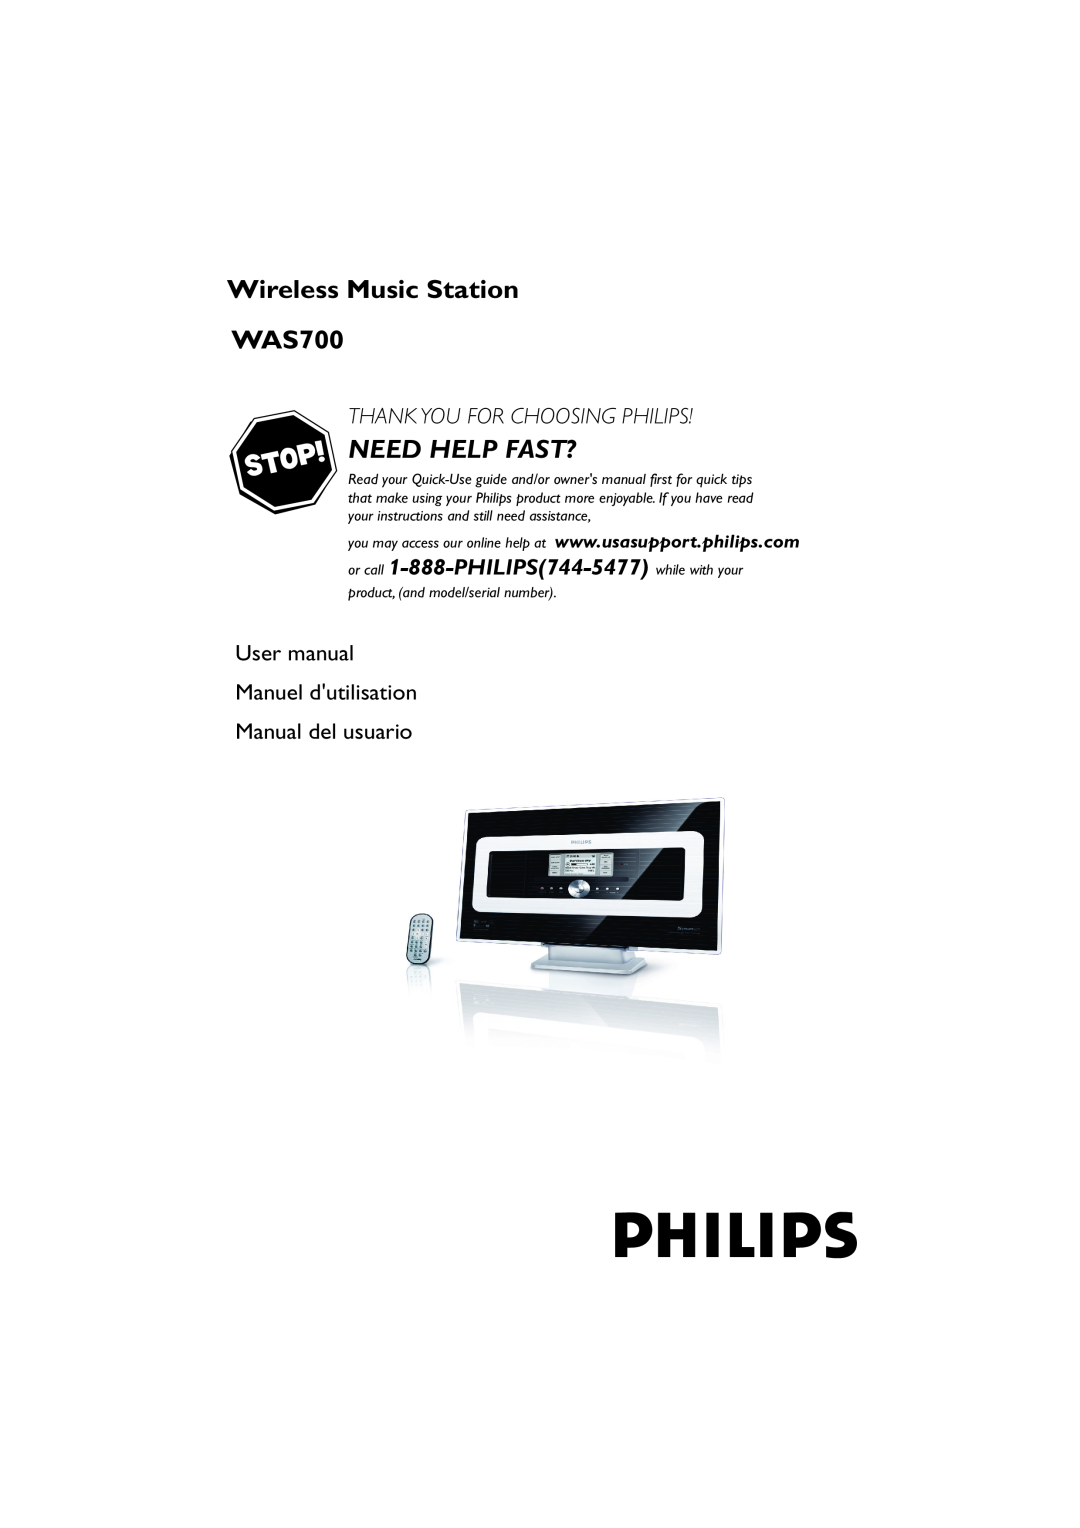 Philips owner manual Wireless Music Station WAS700, or call 1-888-PHILIPS744-5477 while with your, Need Help Fast? 